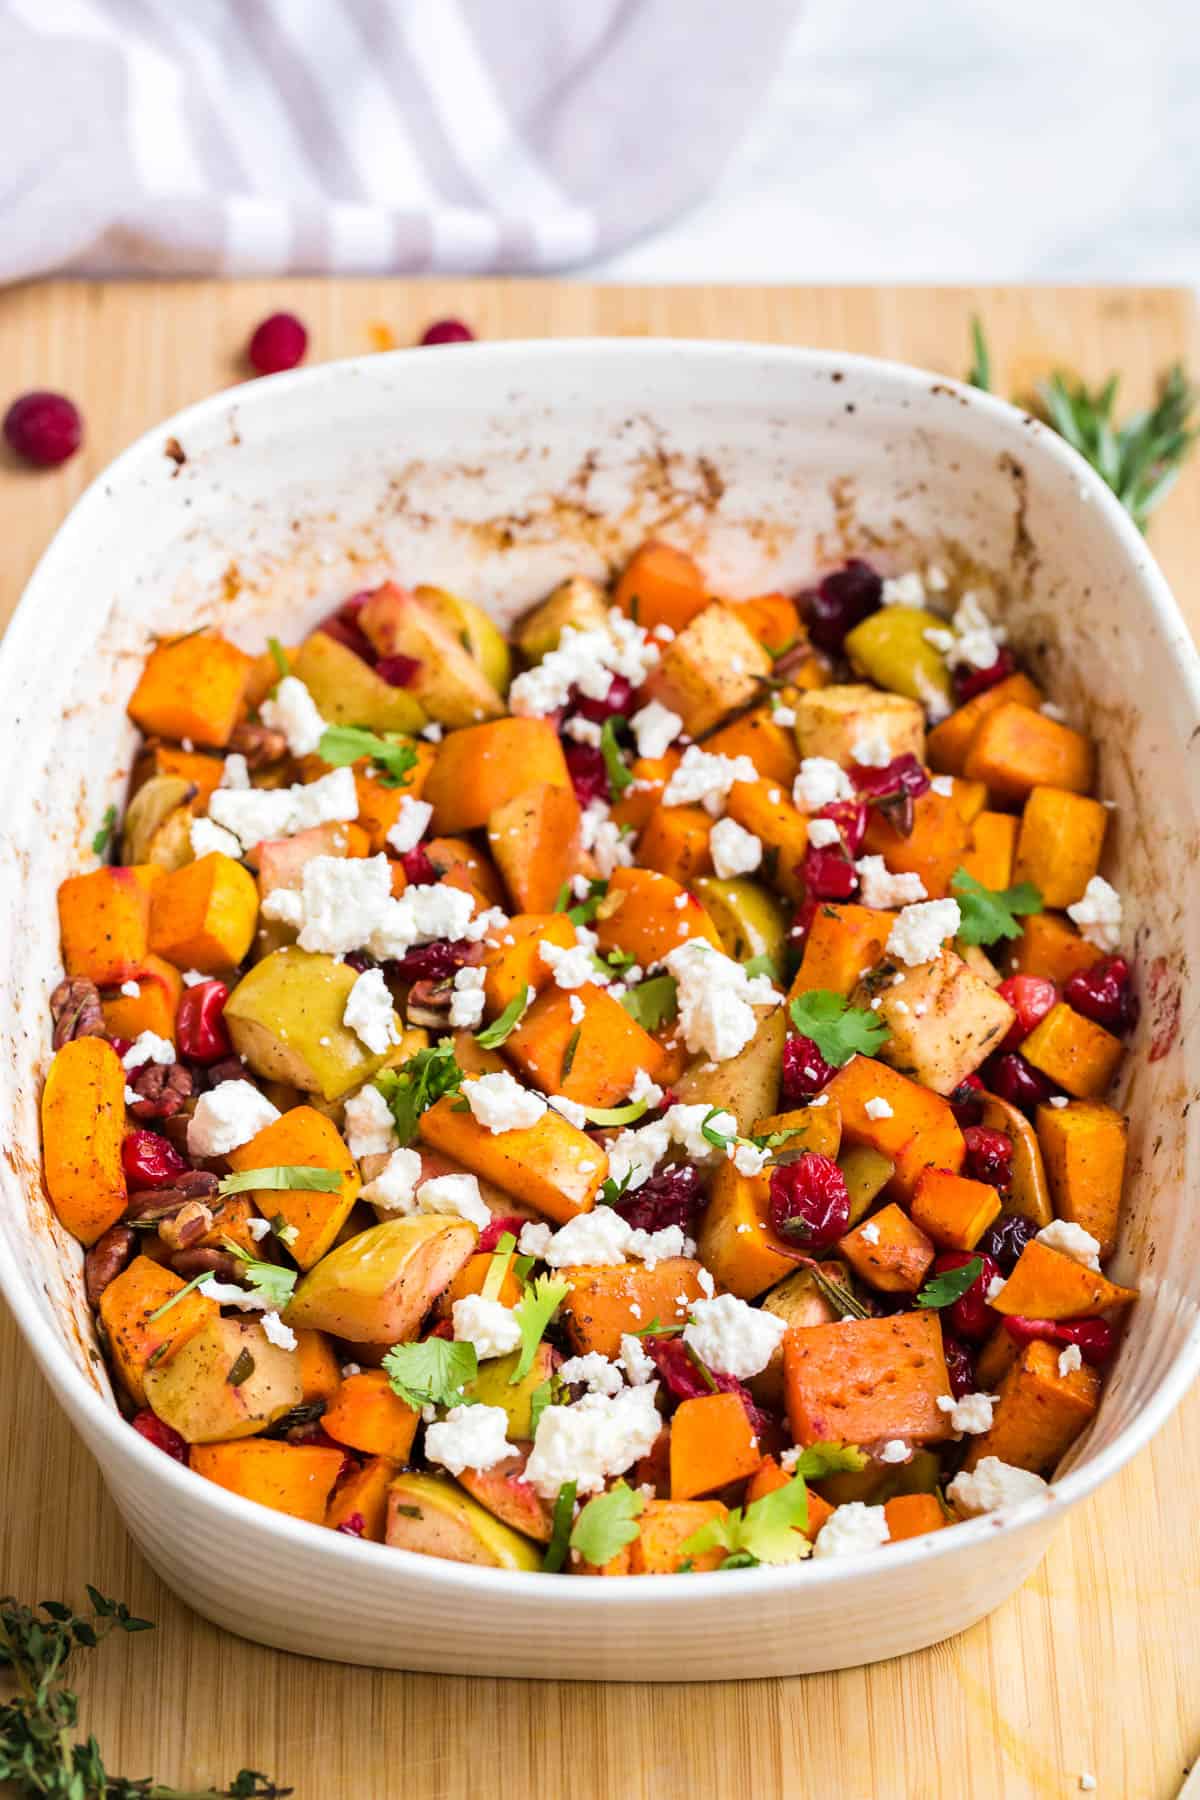 9 x 11.5 casserole dish with roast butternut squash, cranberries, apples and topped with feta cheese